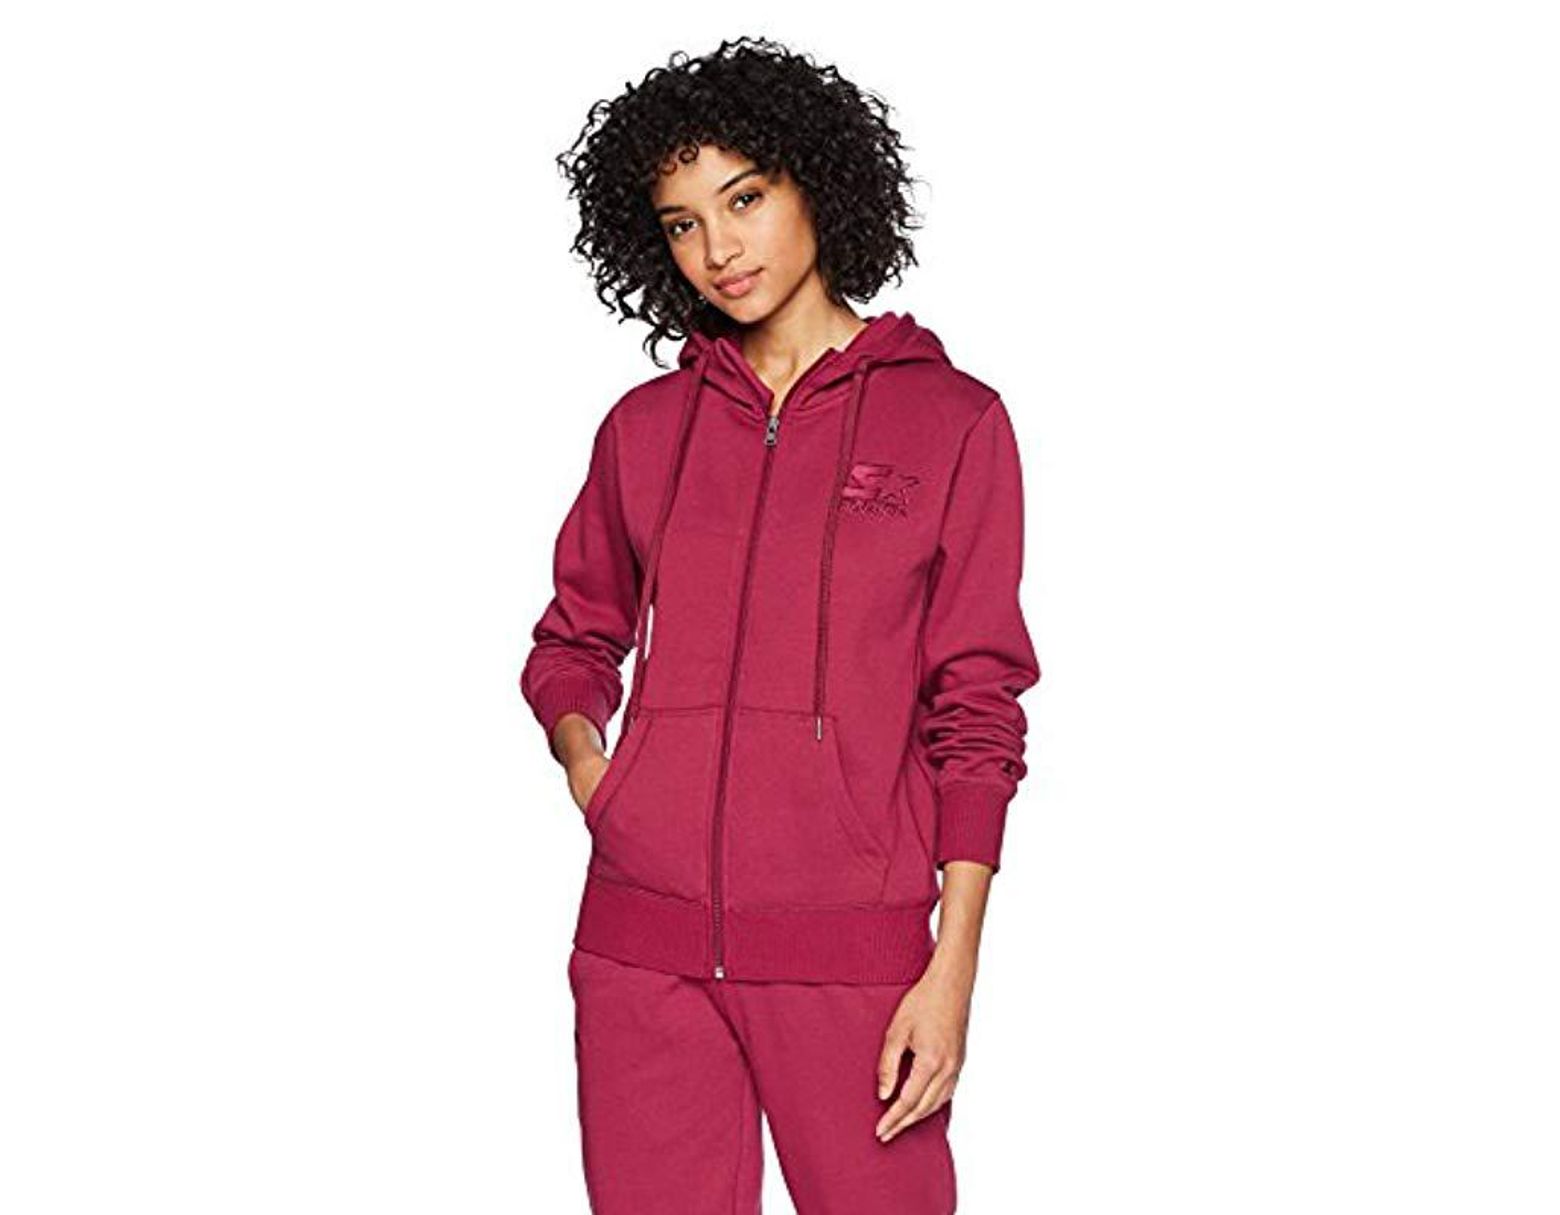 Starter Zip-up Embroidered Logo Hoodie, Amazon Exclusive in Red - Lyst